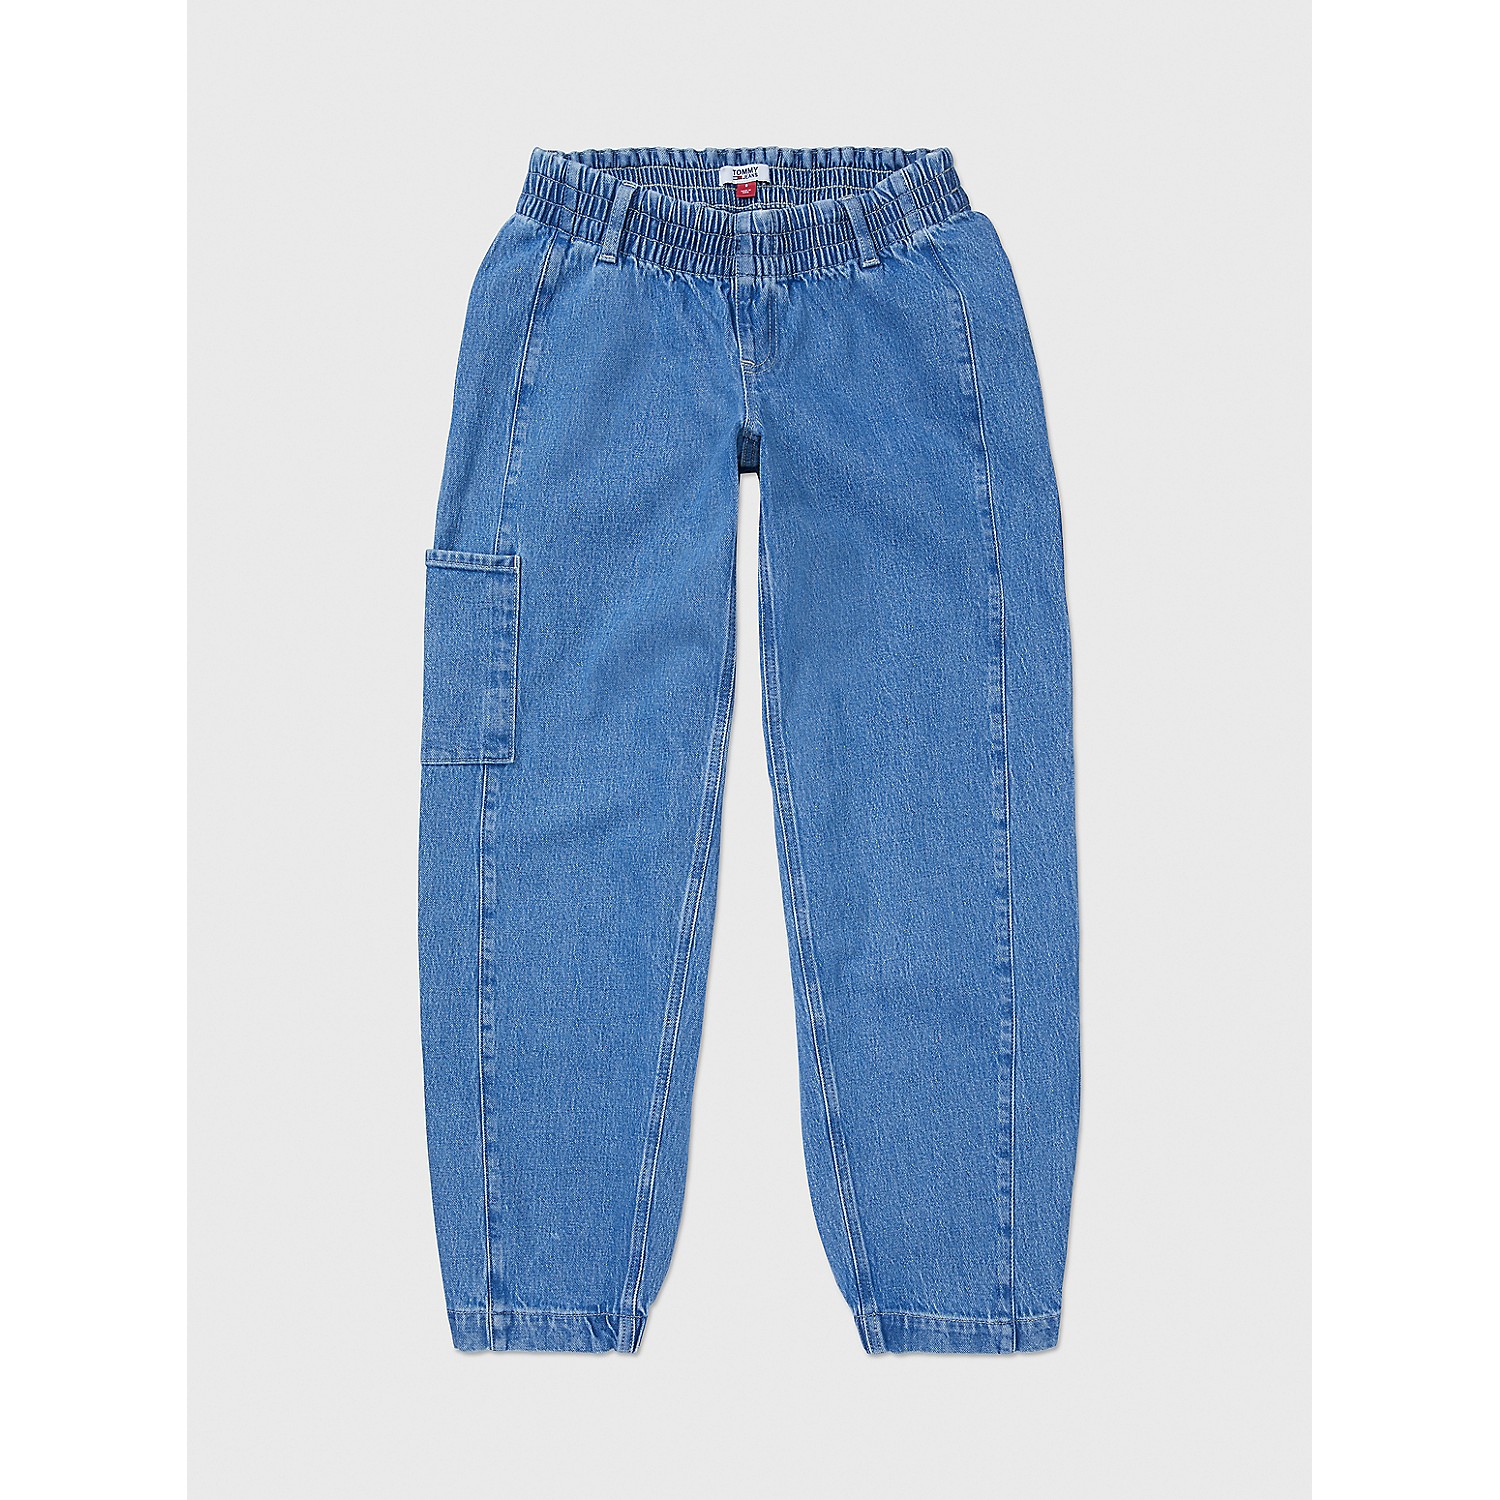 TOMMY HILFIGER Seated Fit Mom Jean